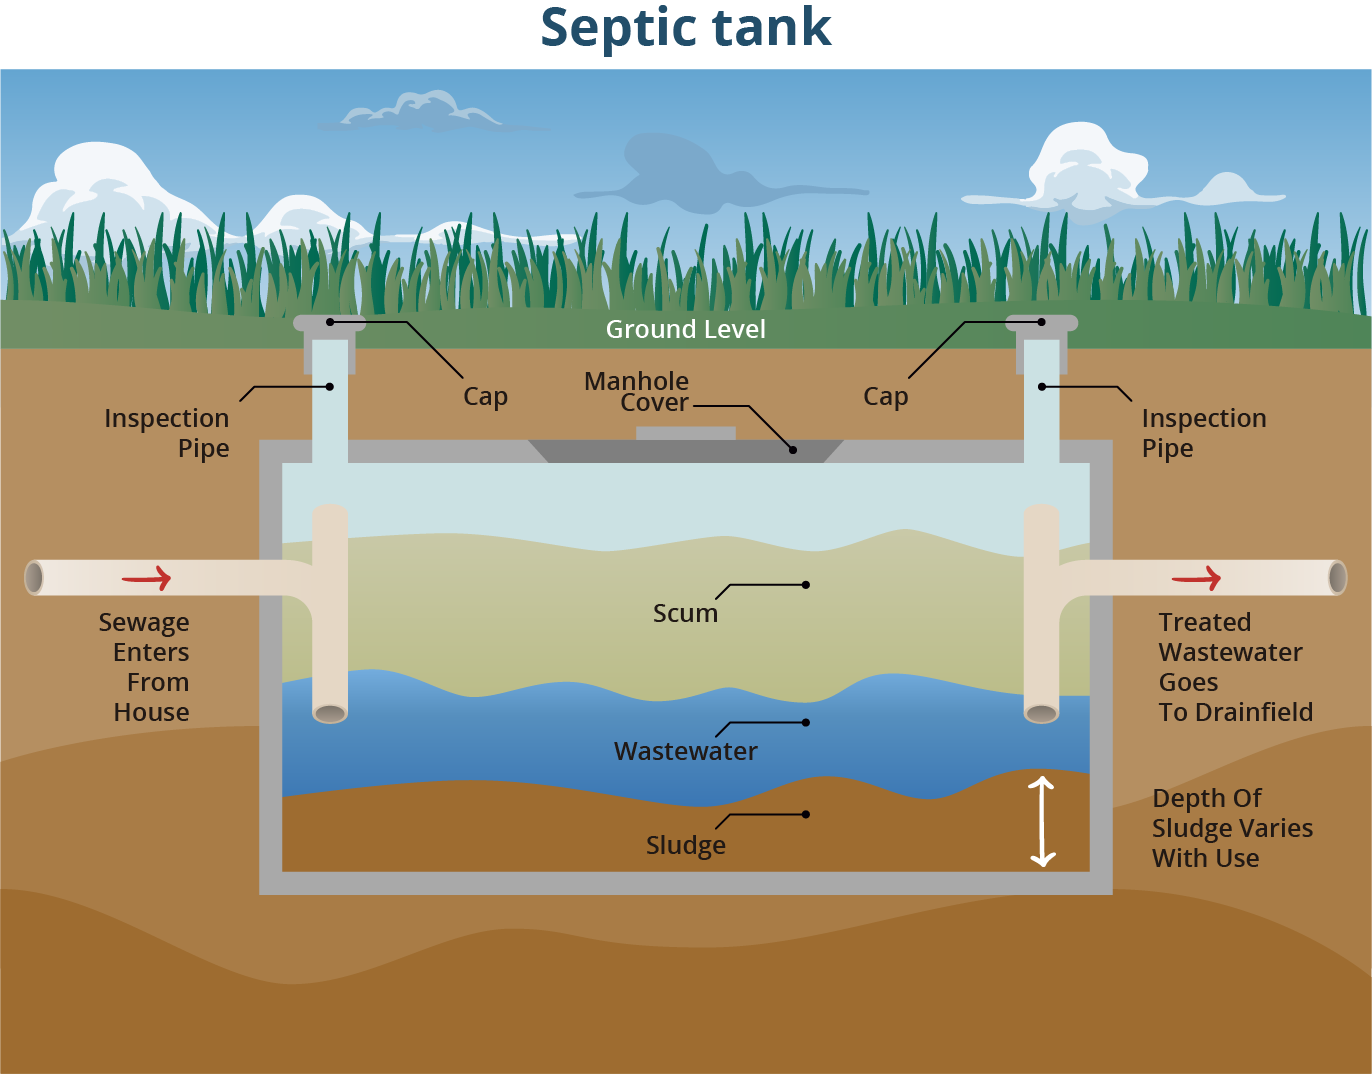 Water Quality Restoration Plans also Focus on Septic